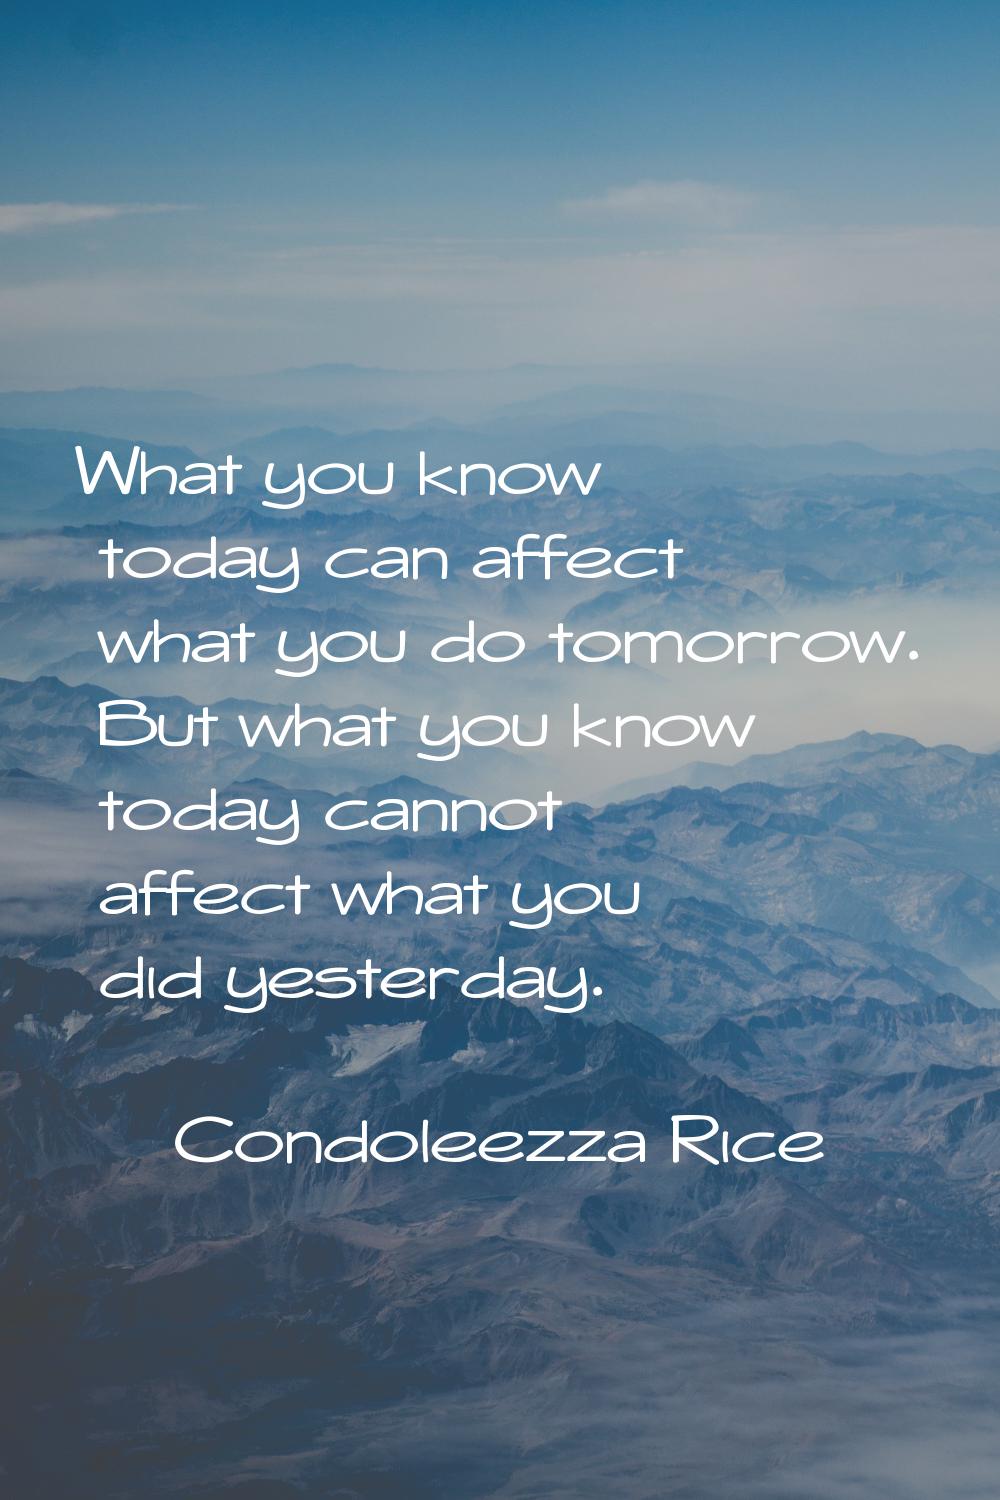 What you know today can affect what you do tomorrow. But what you know today cannot affect what you